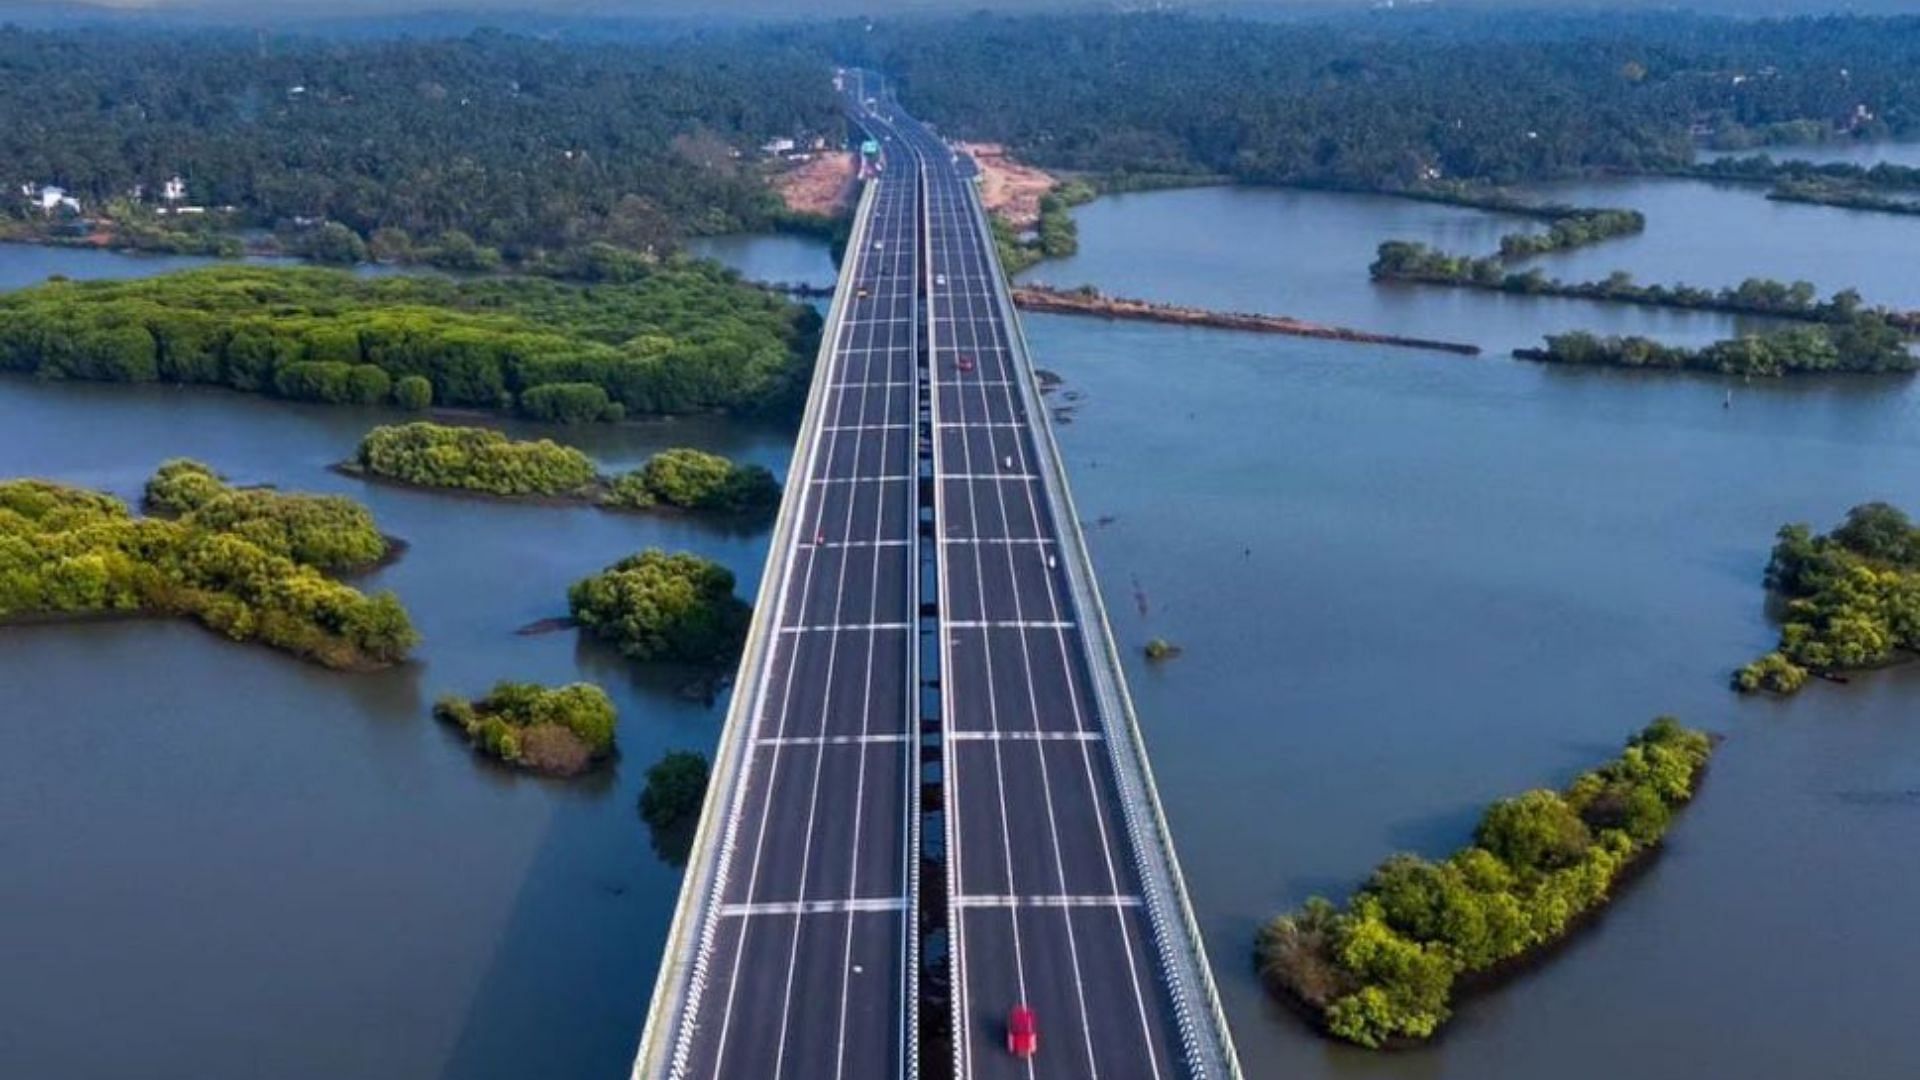 Anand mahindra impressed by the beauty of this bypass shared picture of Thalassery Mahe bypass